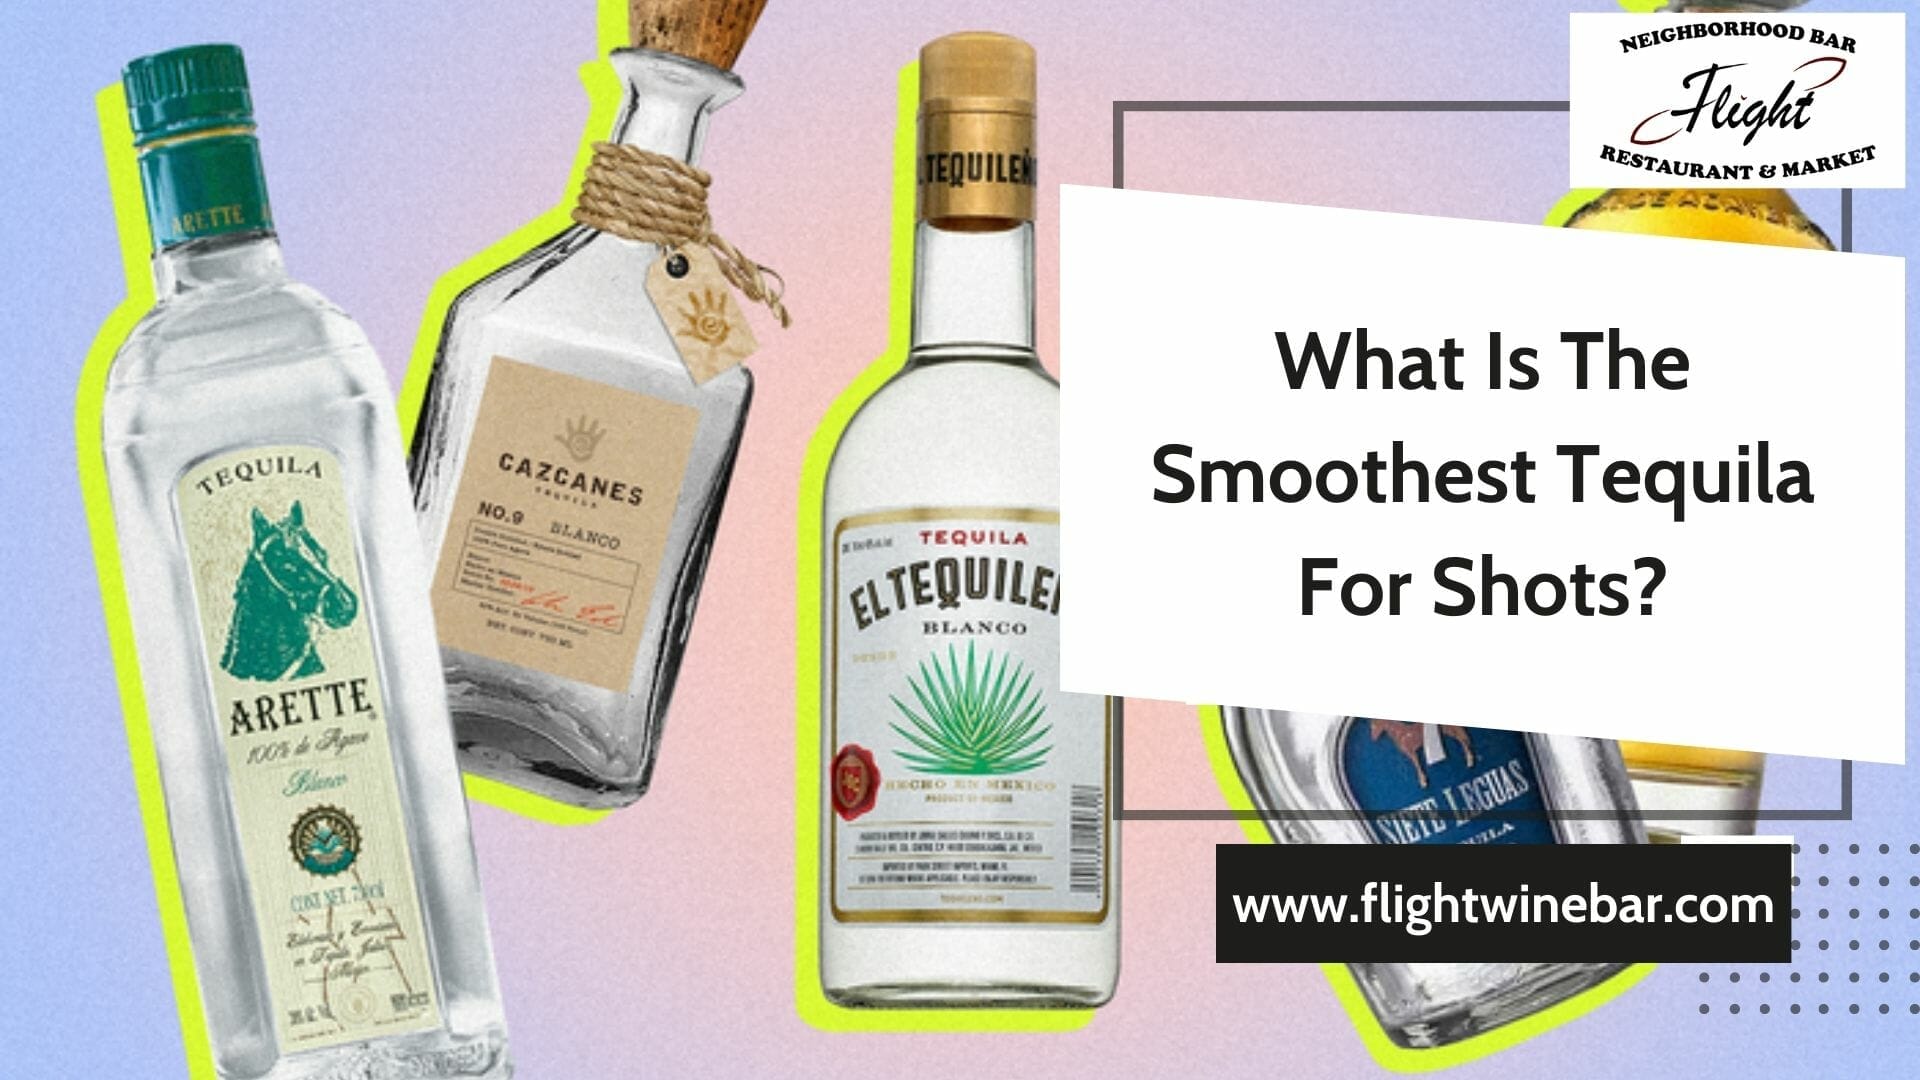 What Is The Smoothest Tequila For Shots